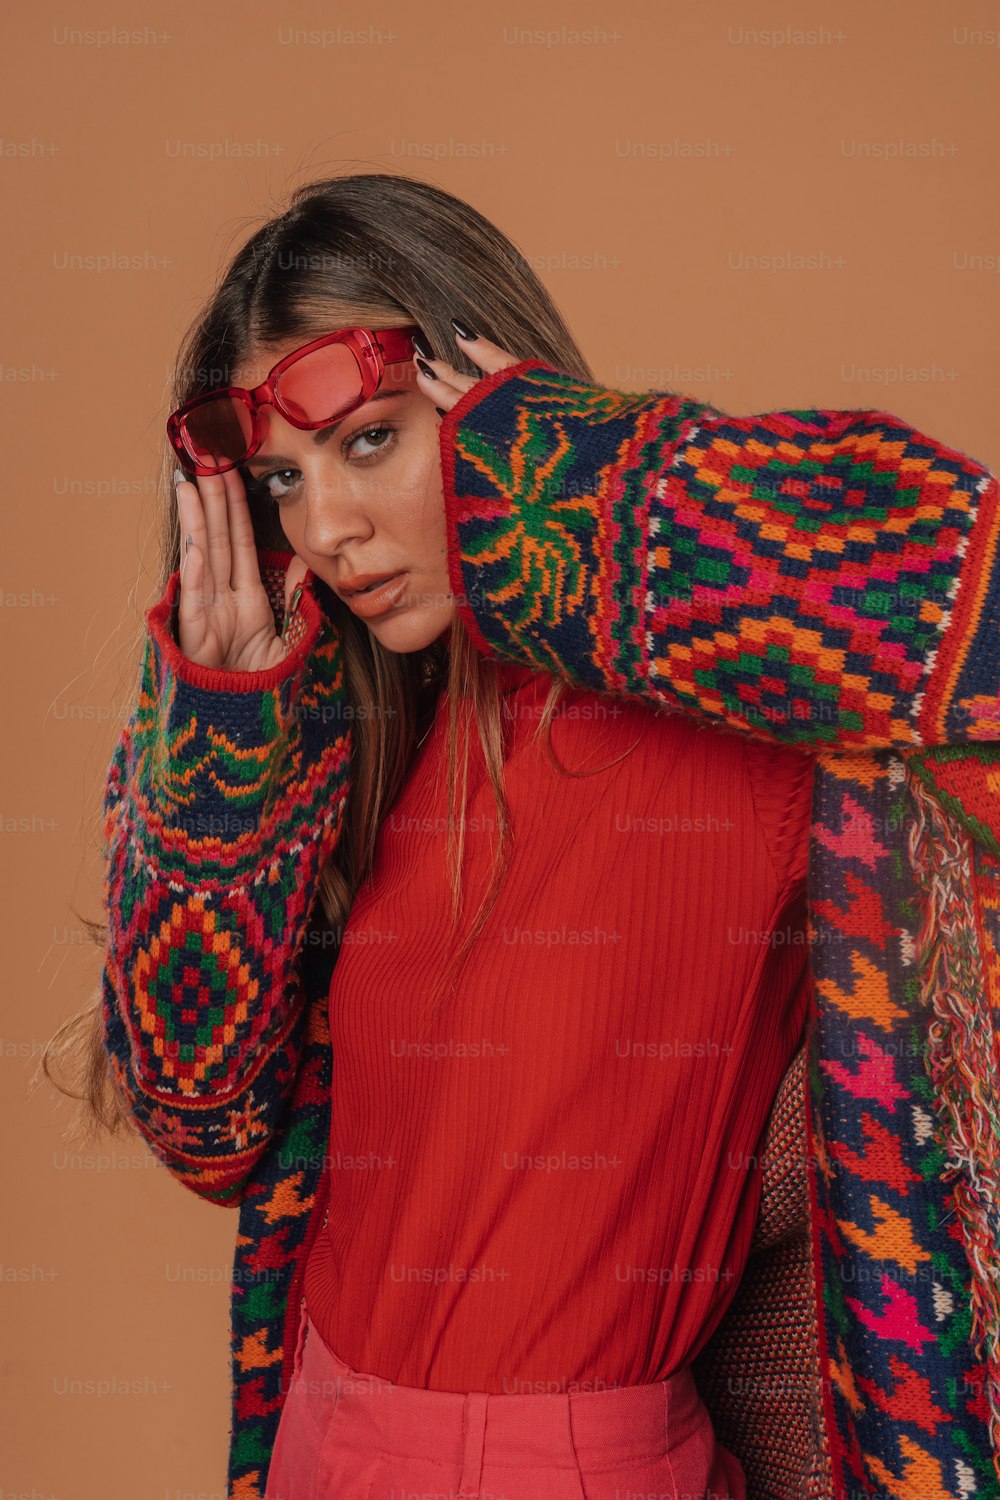 a woman in a red dress and a colorful sweater